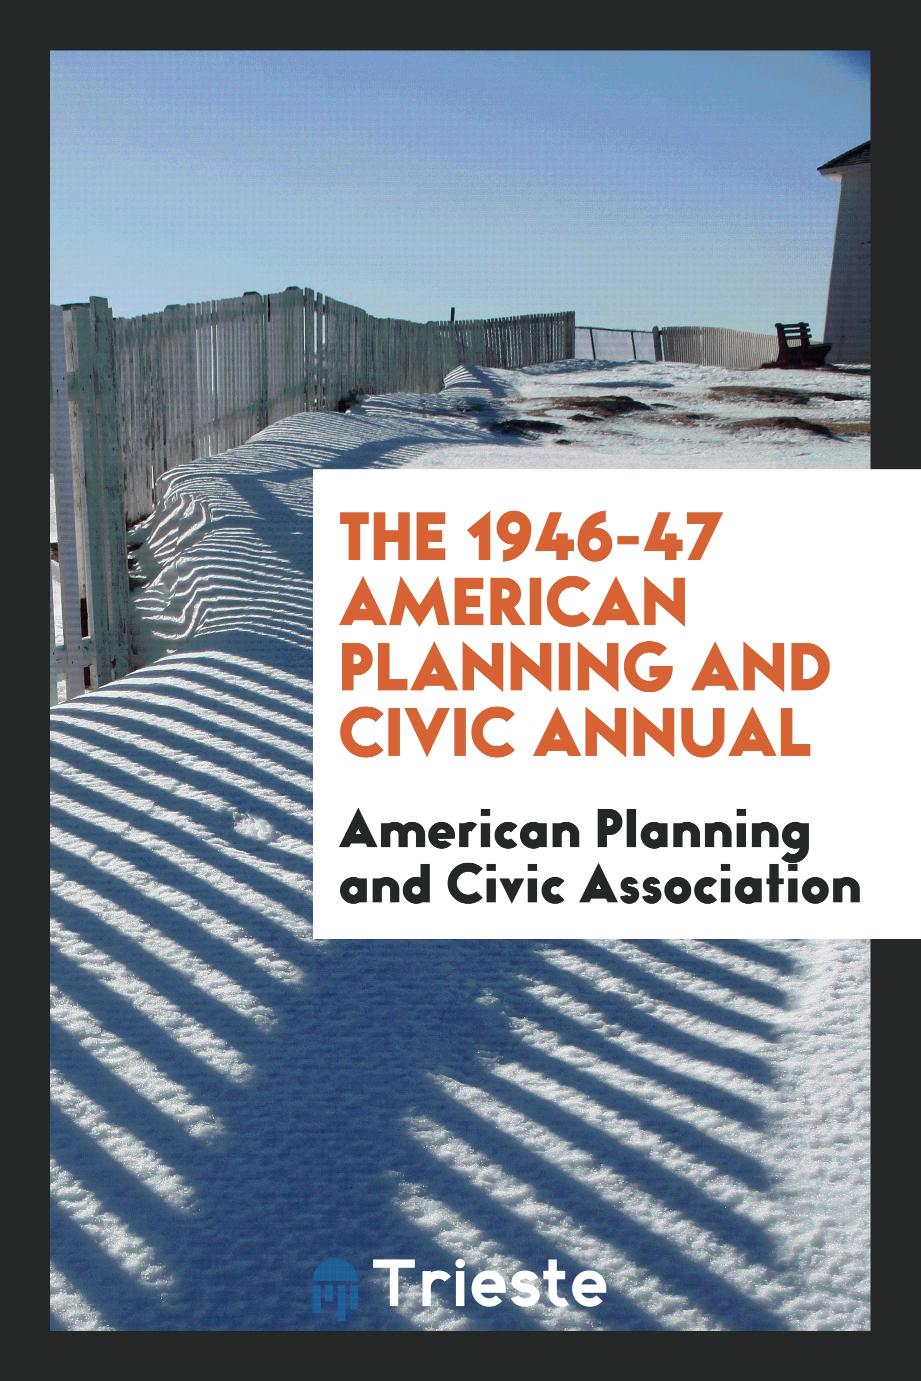 The 1946-47 American planning and civic annual